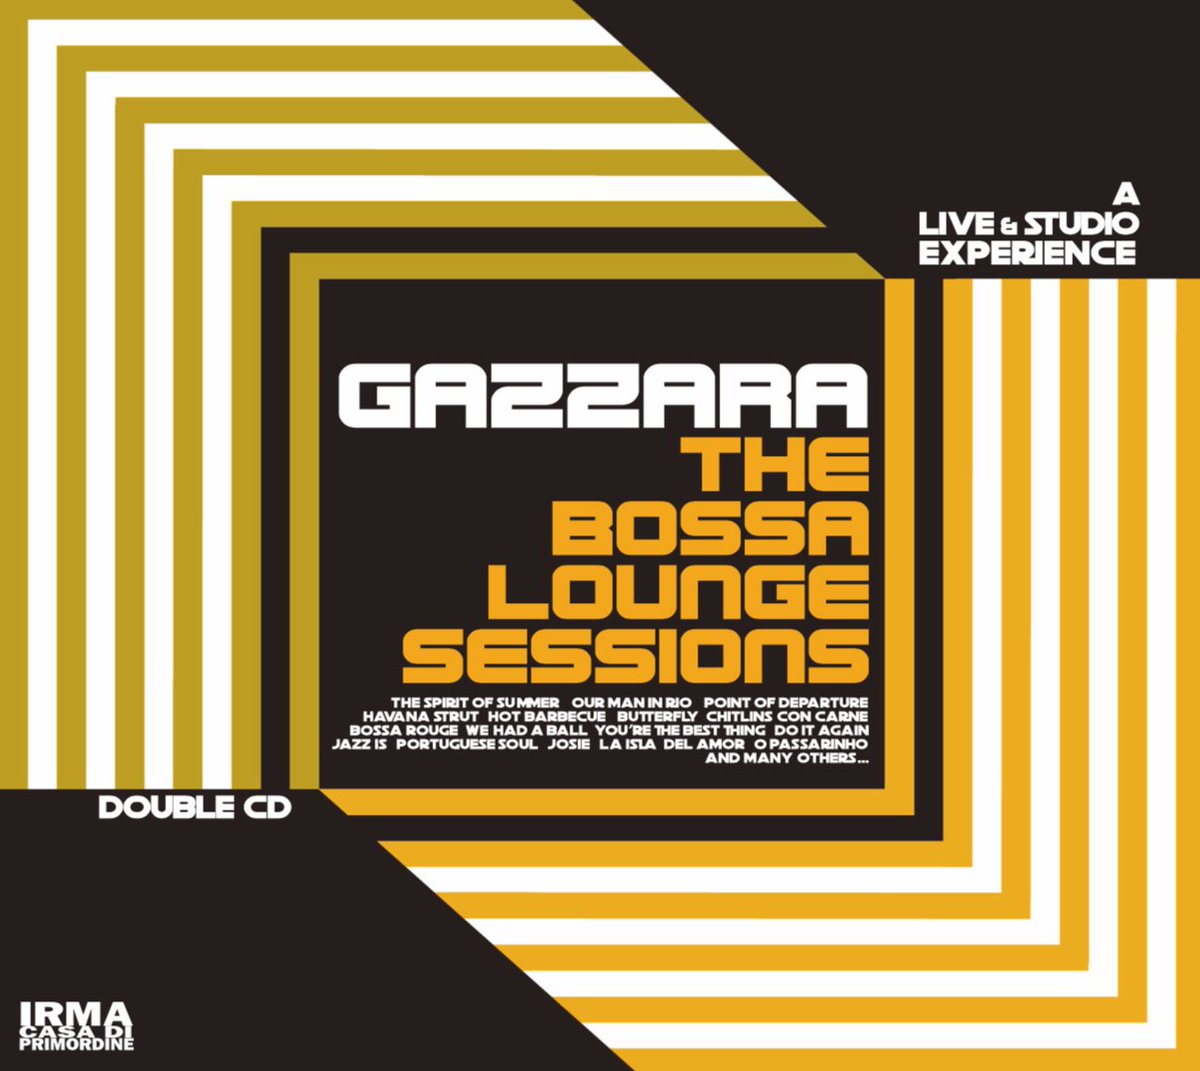 THE BOSSA LOUNGE SESSIONS